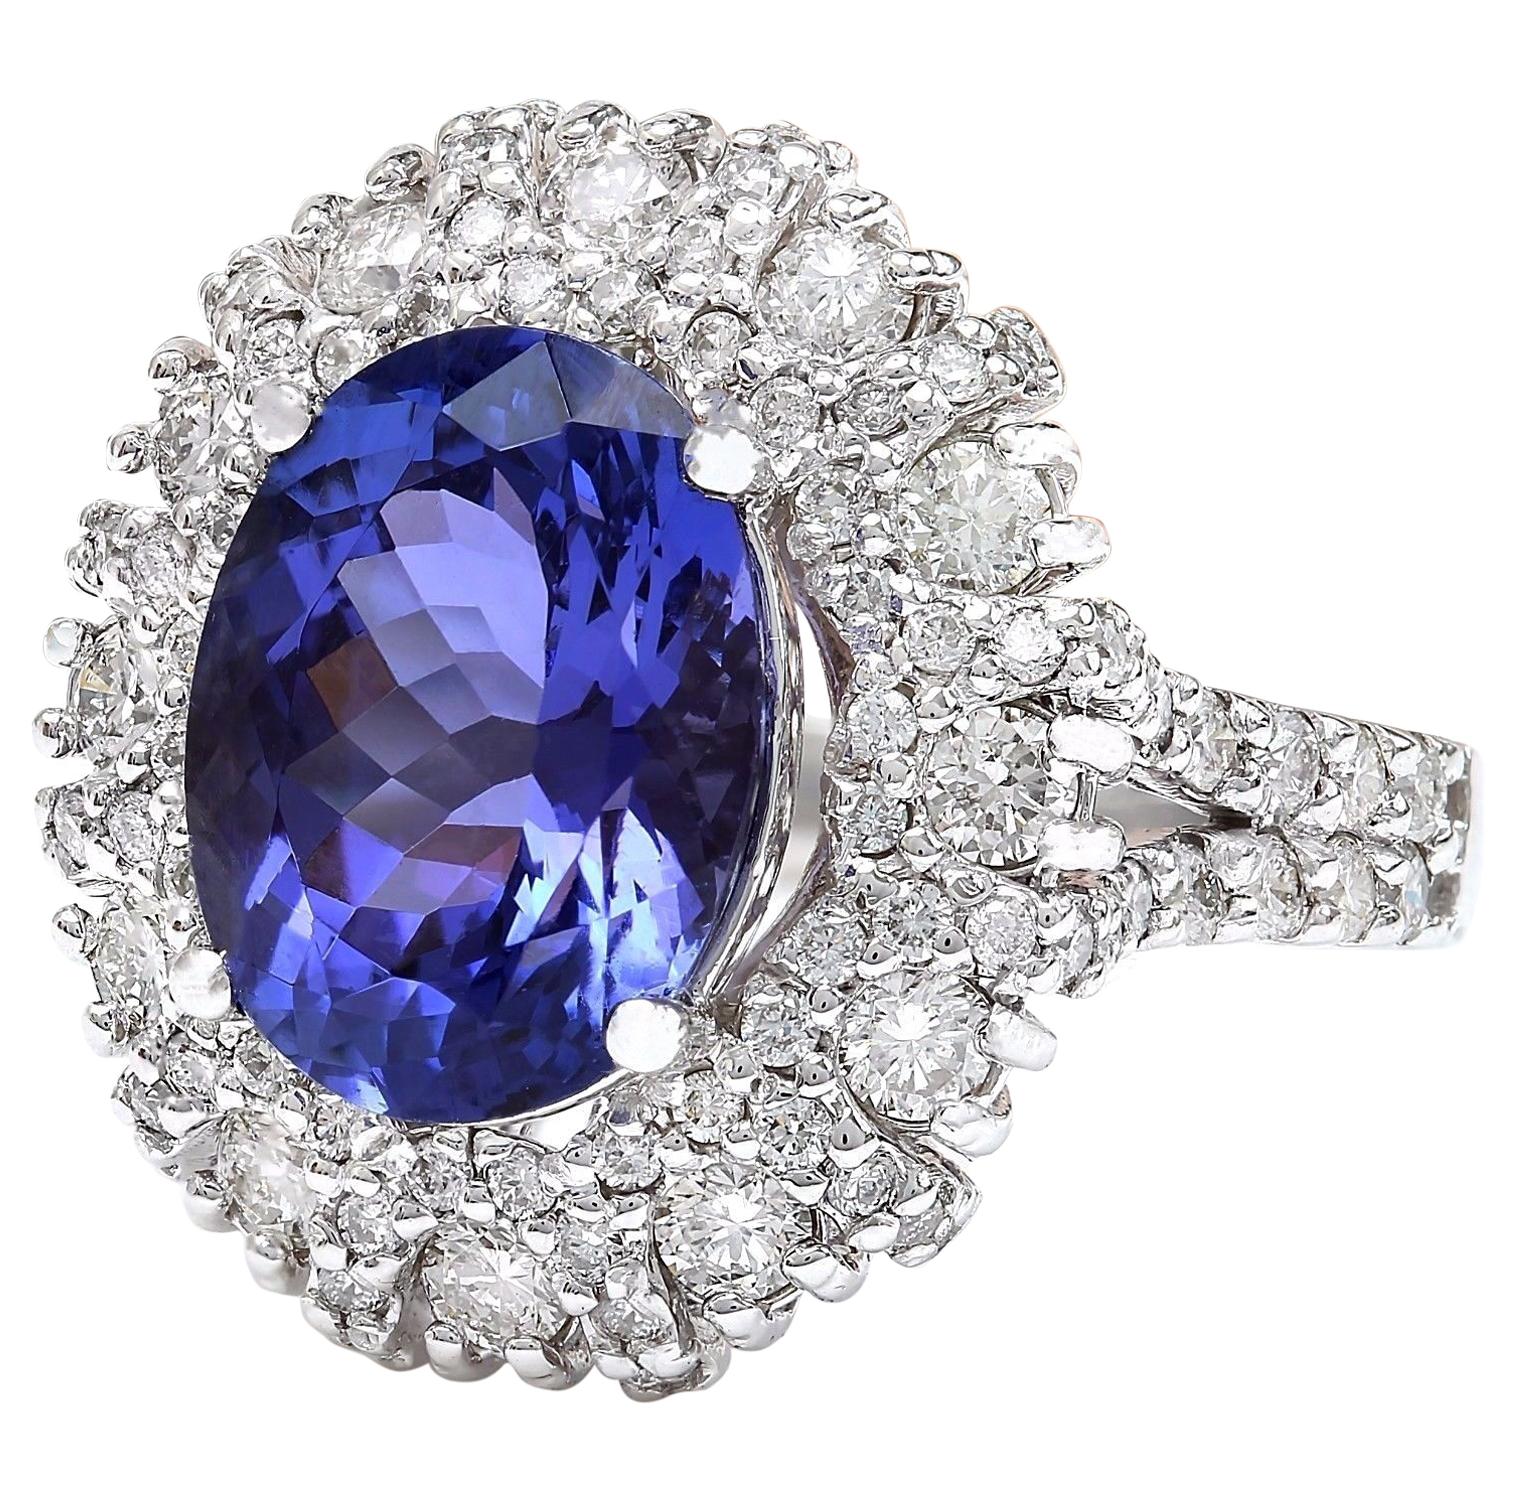 Presenting our exquisite 7.14 Carat Tanzanite 14K Solid White Gold Diamond Ring. Crafted from genuine 14K White Gold, this ring boasts a total metal weight of 5.6 grams, ensuring both quality and durability. At its center shines a stunning